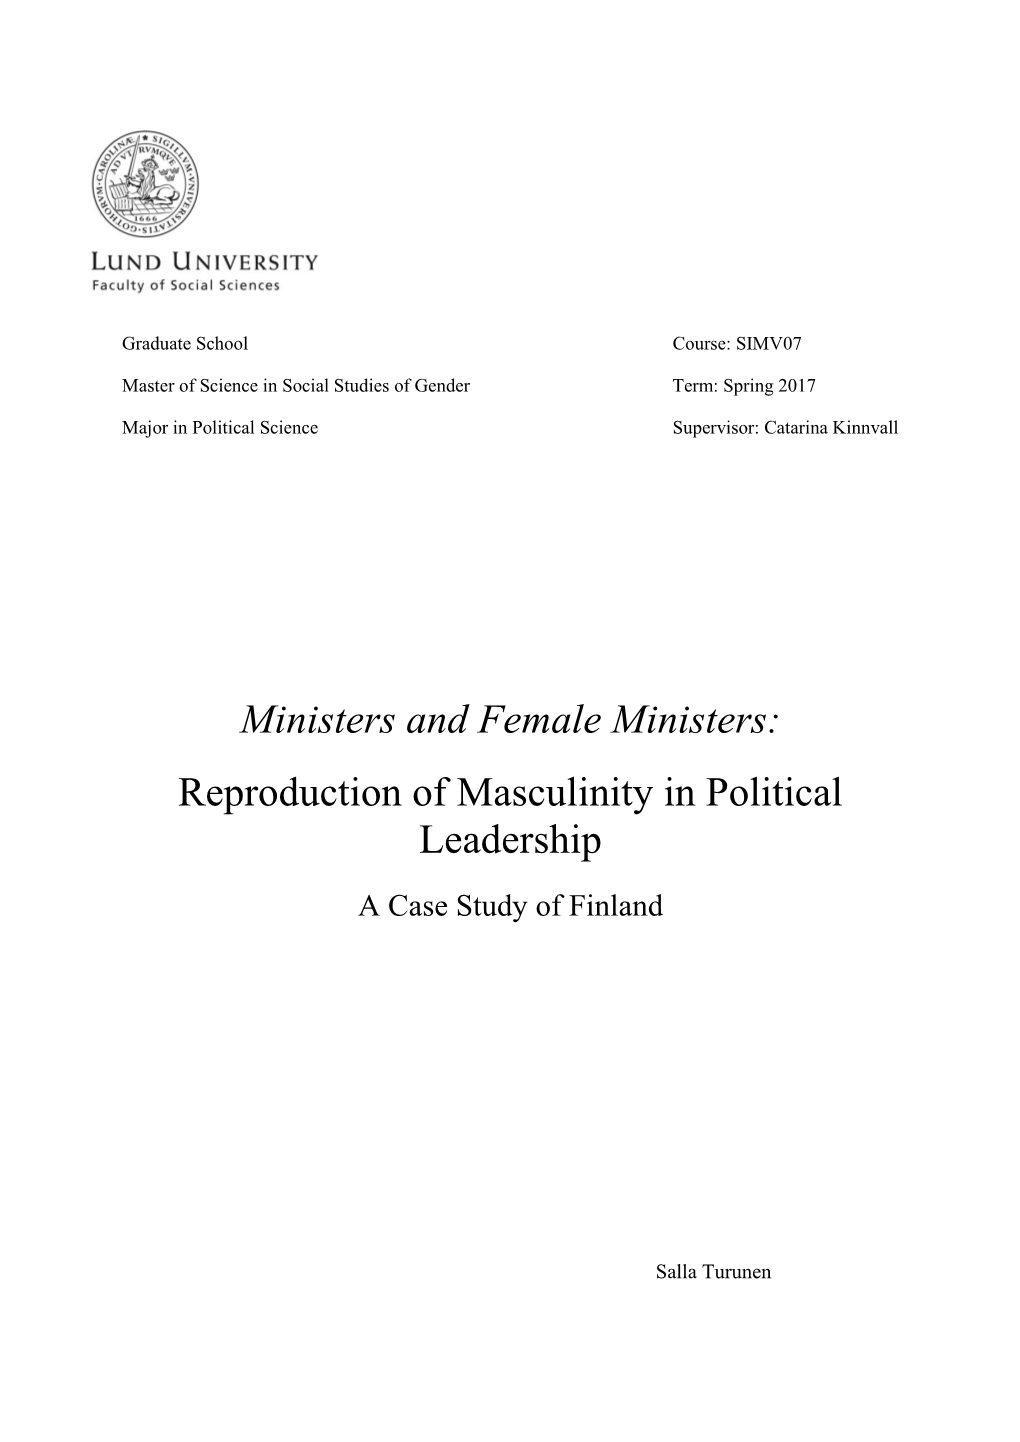 Reproduction of Masculinity in Political Leadership a Case Study of Finland